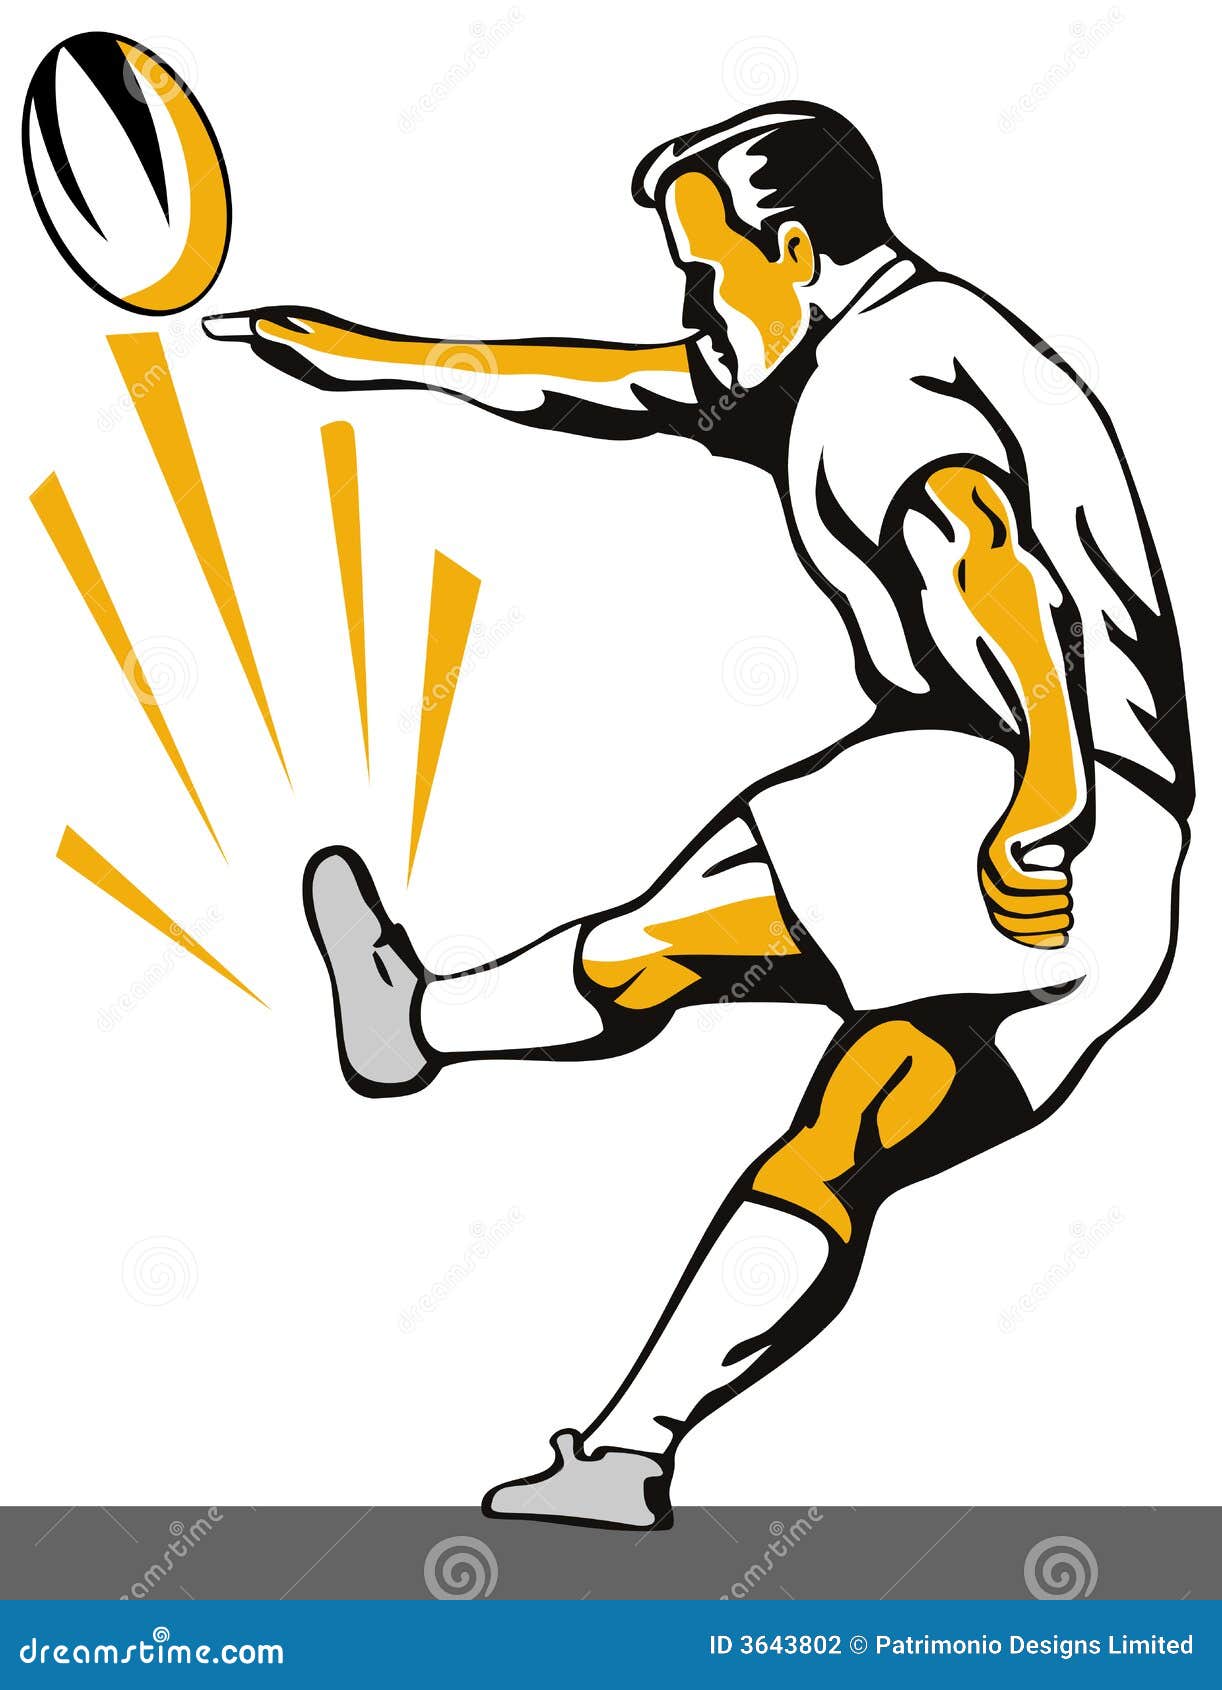 clipart rugby player - photo #50